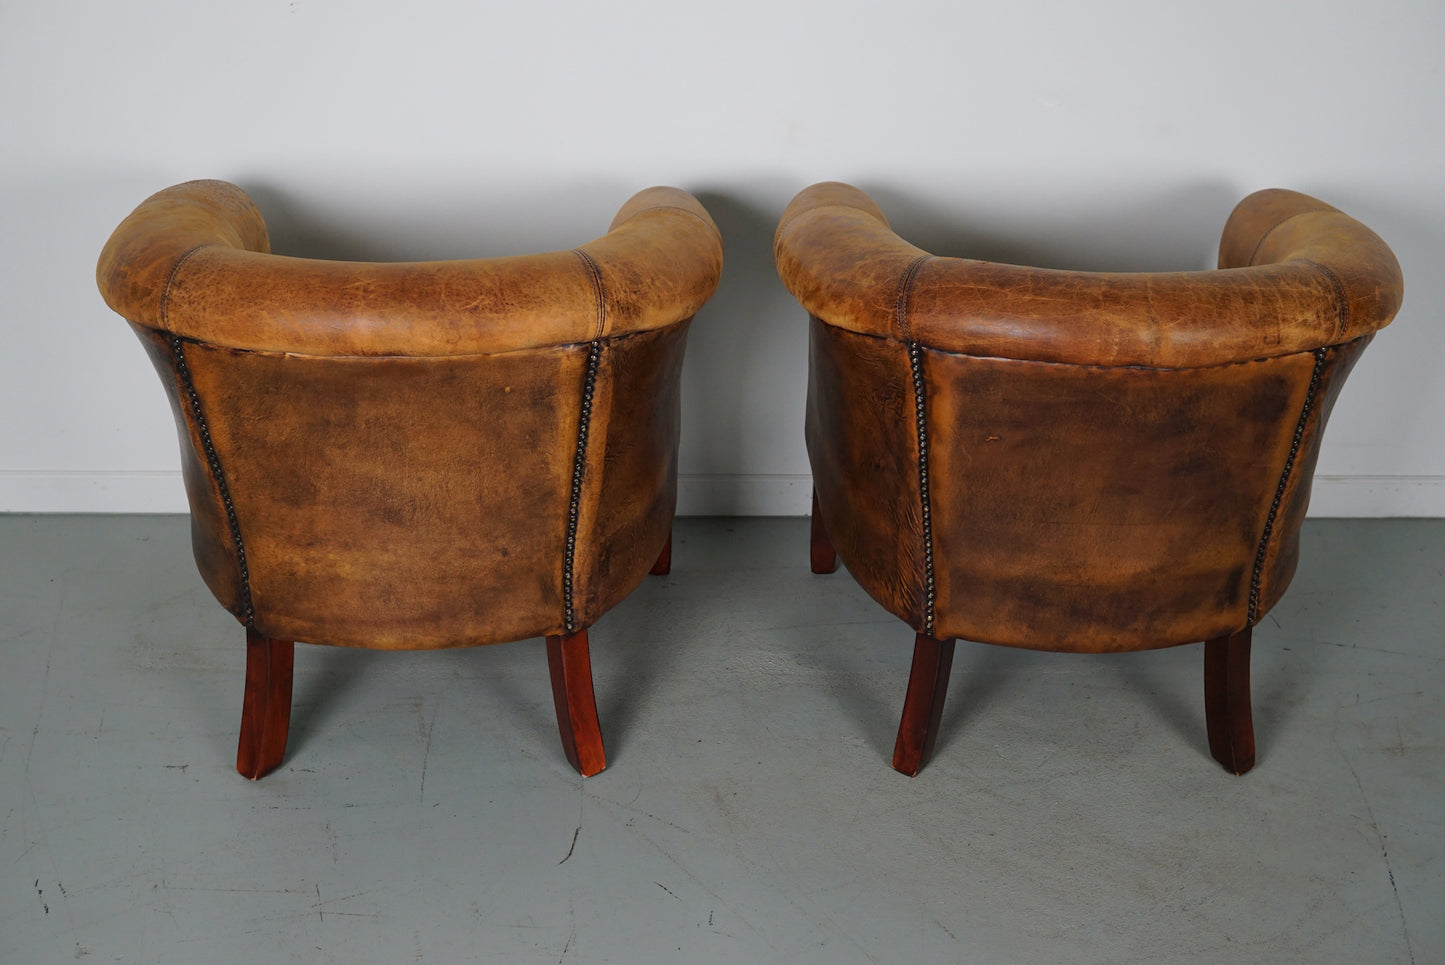 Vintage Dutch Cognac Colored Leather Club Chair, Set of 2 with Footstools